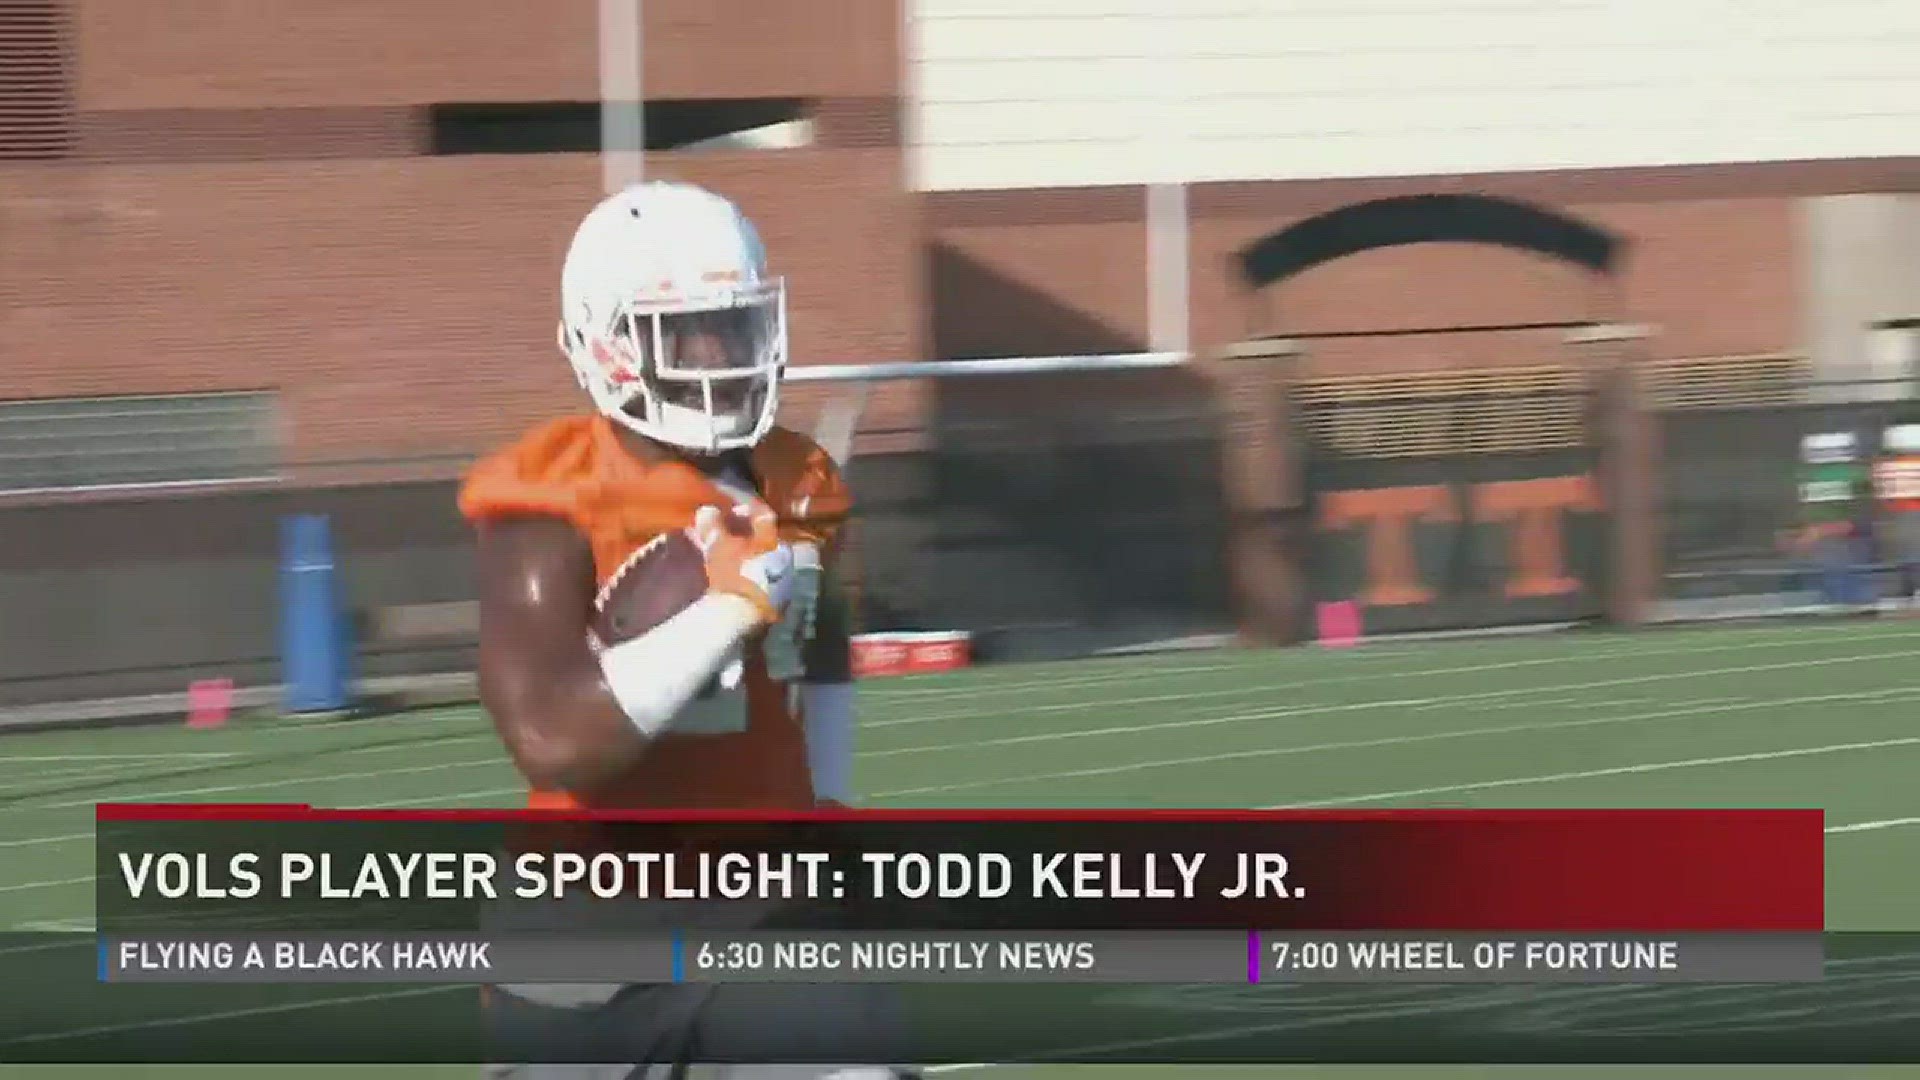 Get to know Vols safety Todd Kelly Jr. including analysis from govols247's Wes Rucker